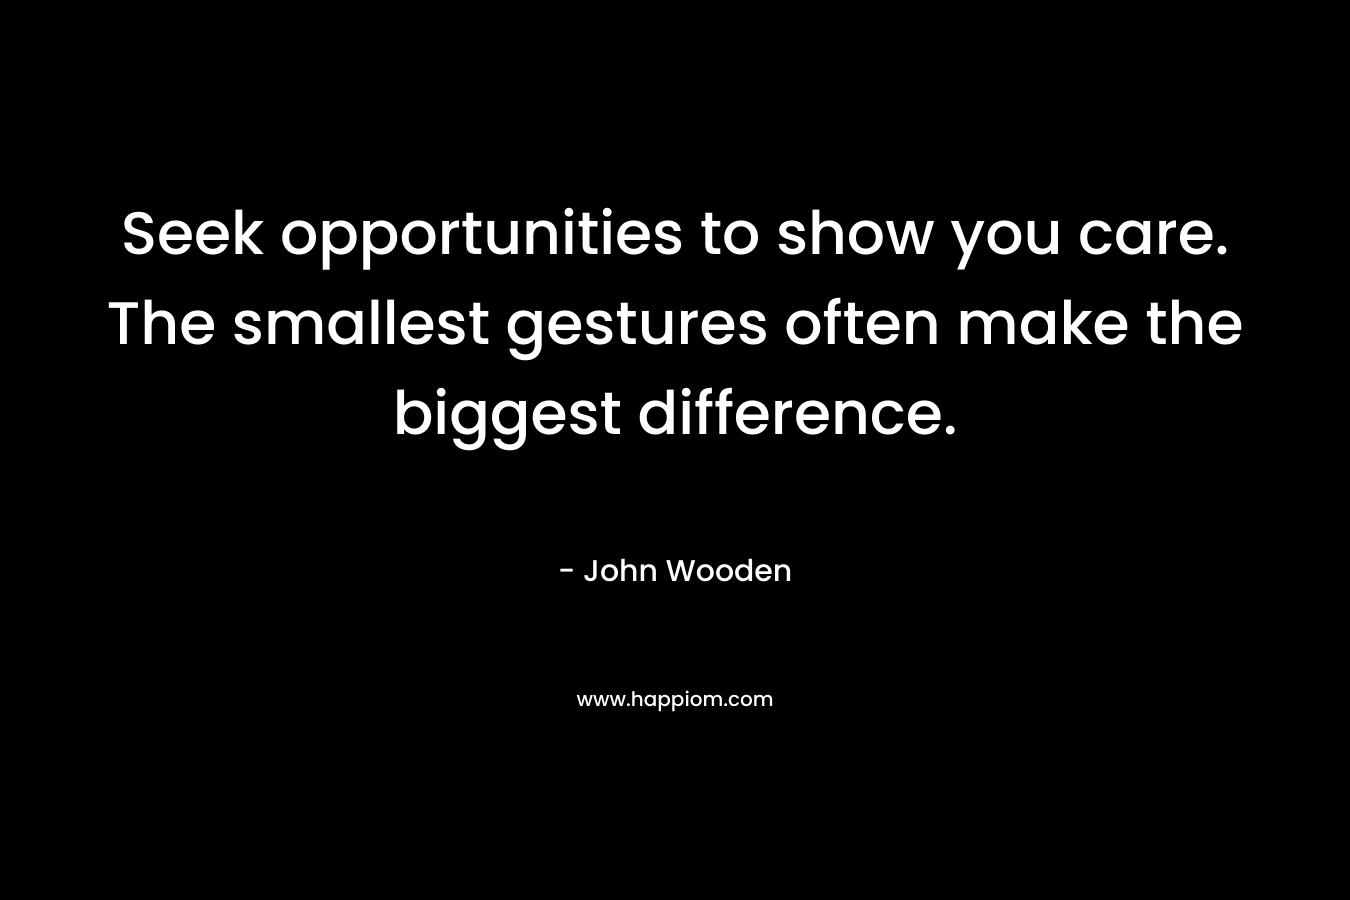 Seek opportunities to show you care. The smallest gestures often make the biggest difference. – John Wooden